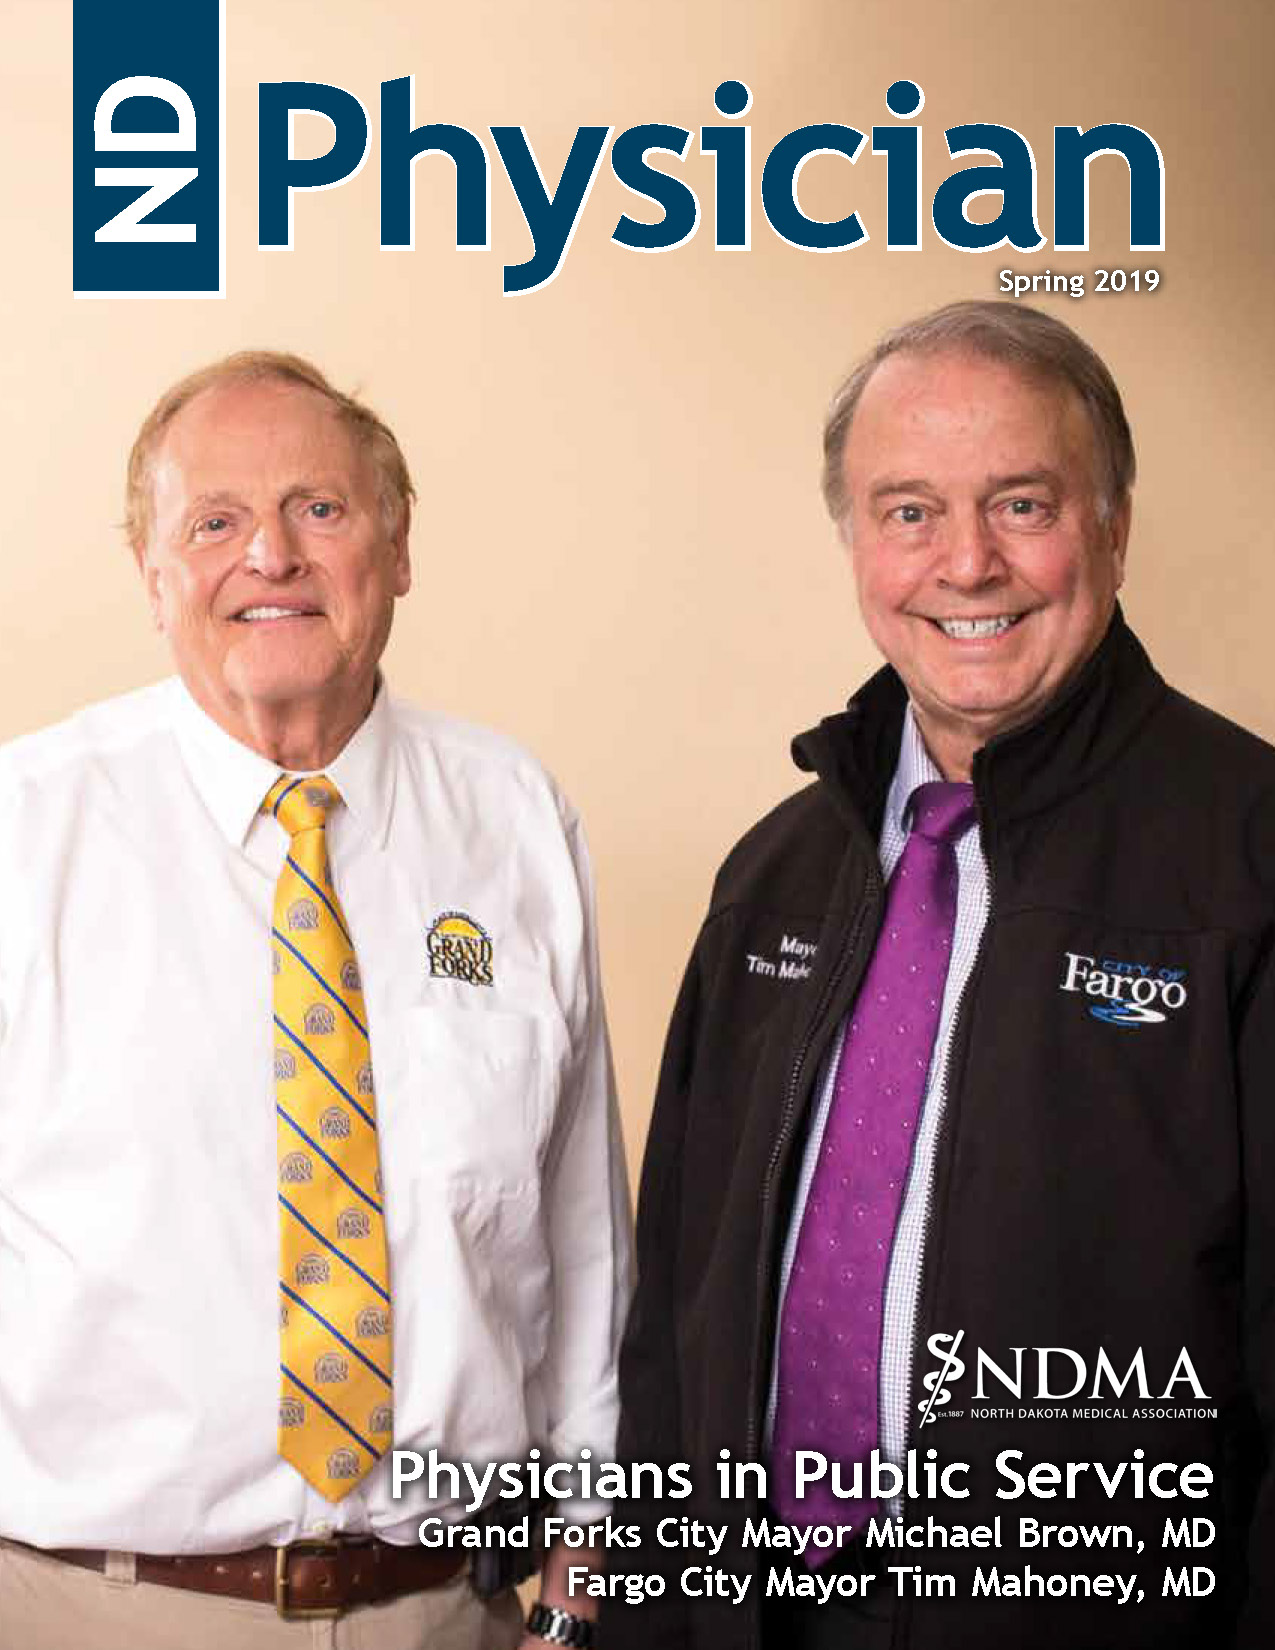 ND Physician Spring 2019 magazine cover